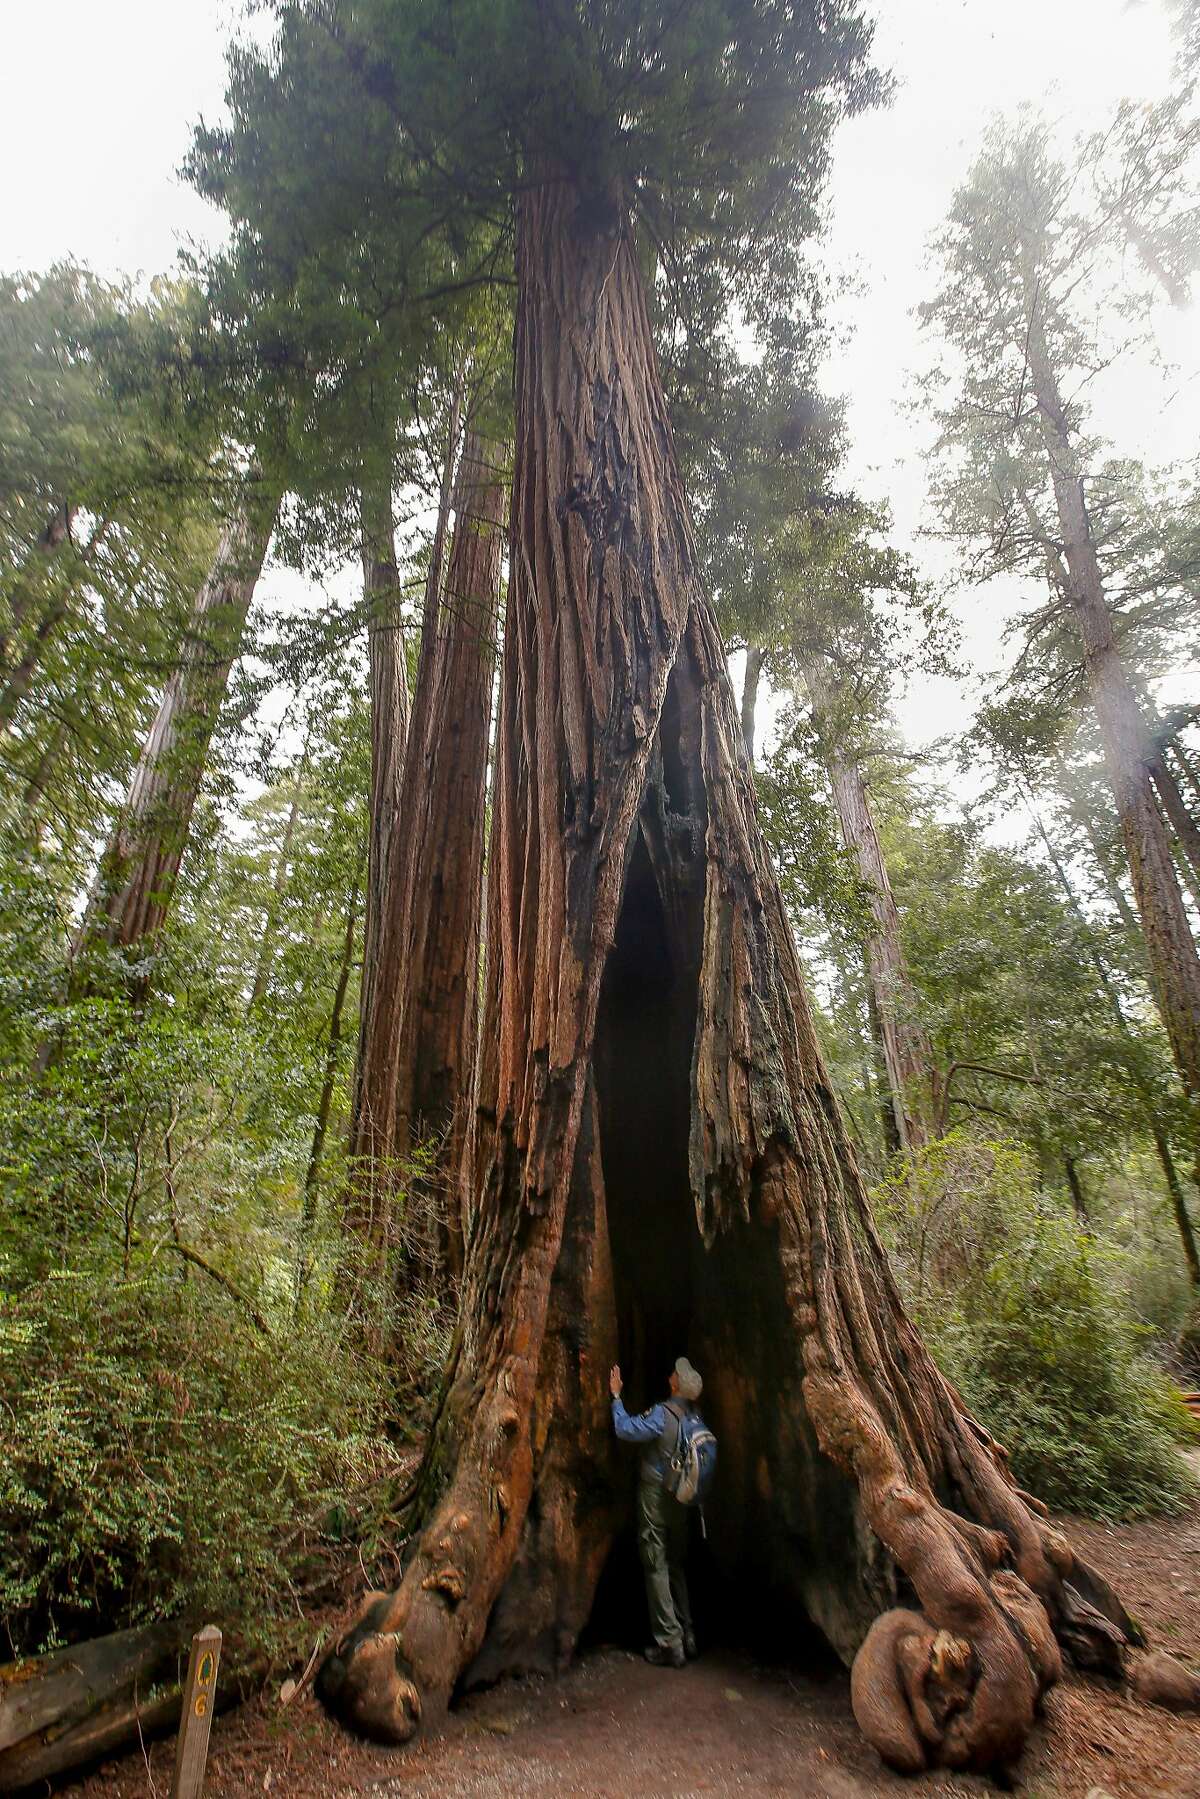 Micheal Sinensky stands inside the a giant redwood tree called the Chimney Tree on Redwood trail that was hollowed out by fire in Big Basin Redwoods State Park on Sunday 19, 2017 in Boulder Creek, Calif.